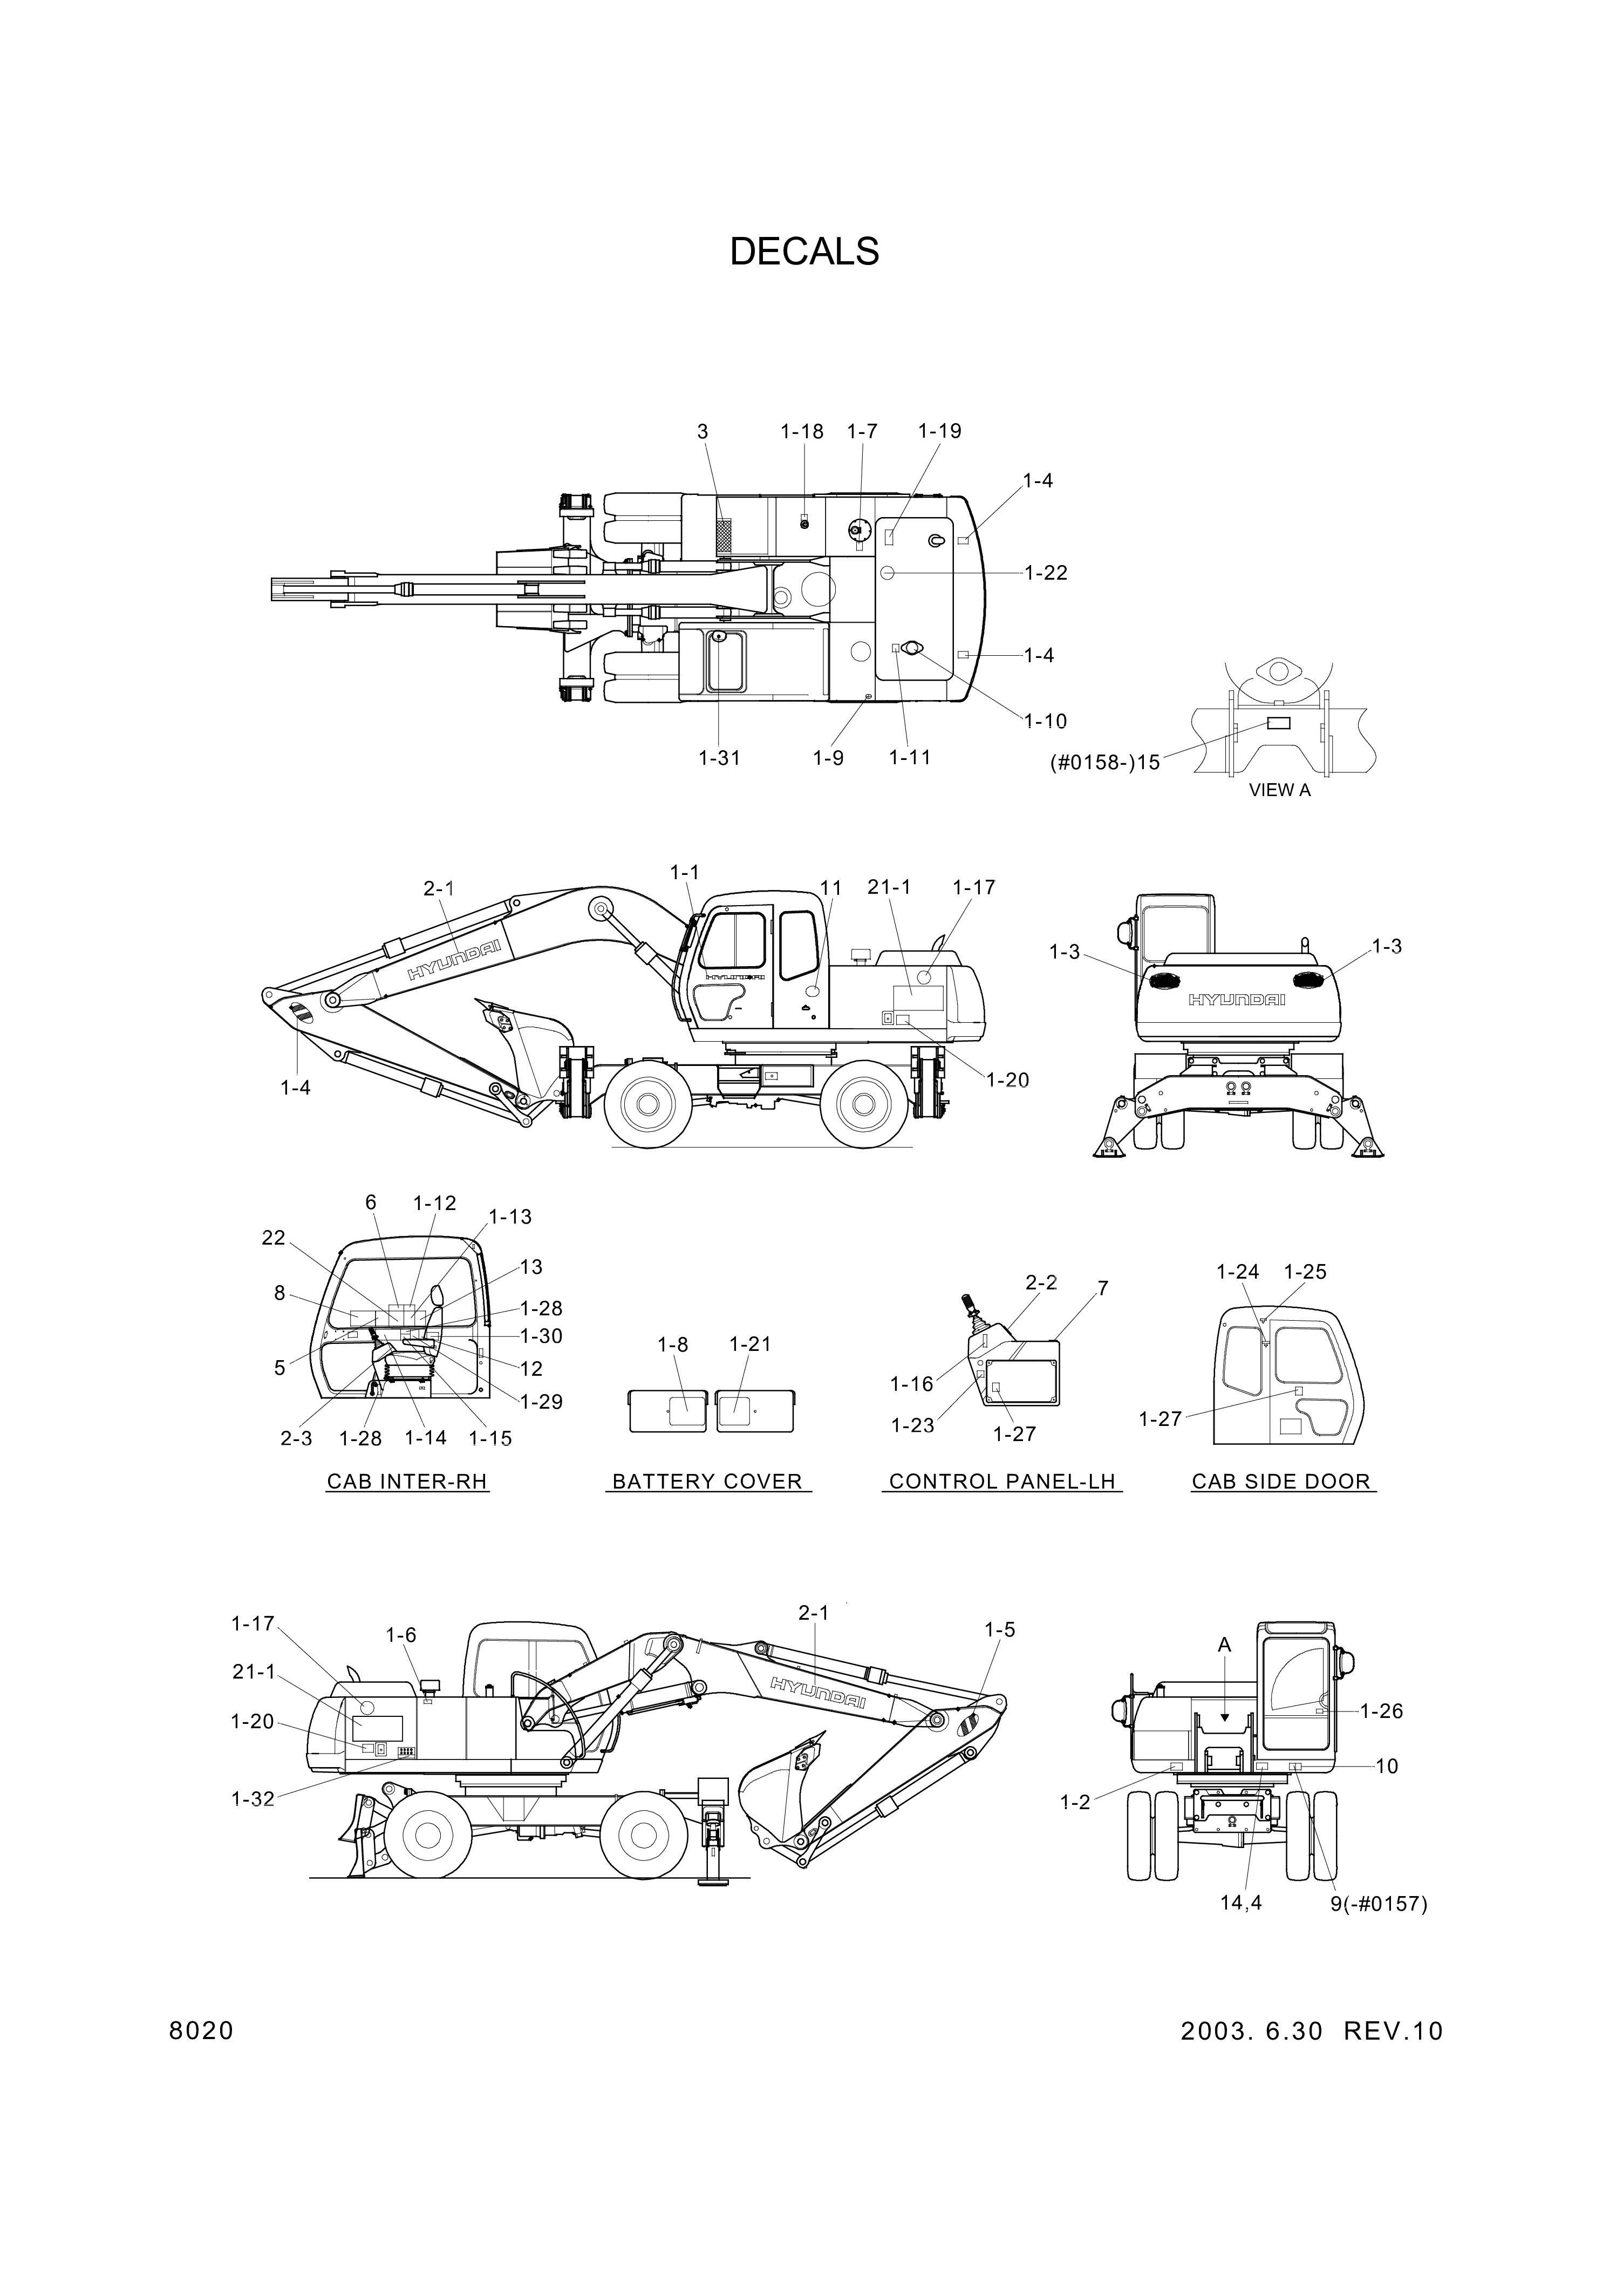 drawing for Hyundai Construction Equipment 95EA-29020 - DECAL-CONTROL IDEOGRAM (figure 1)